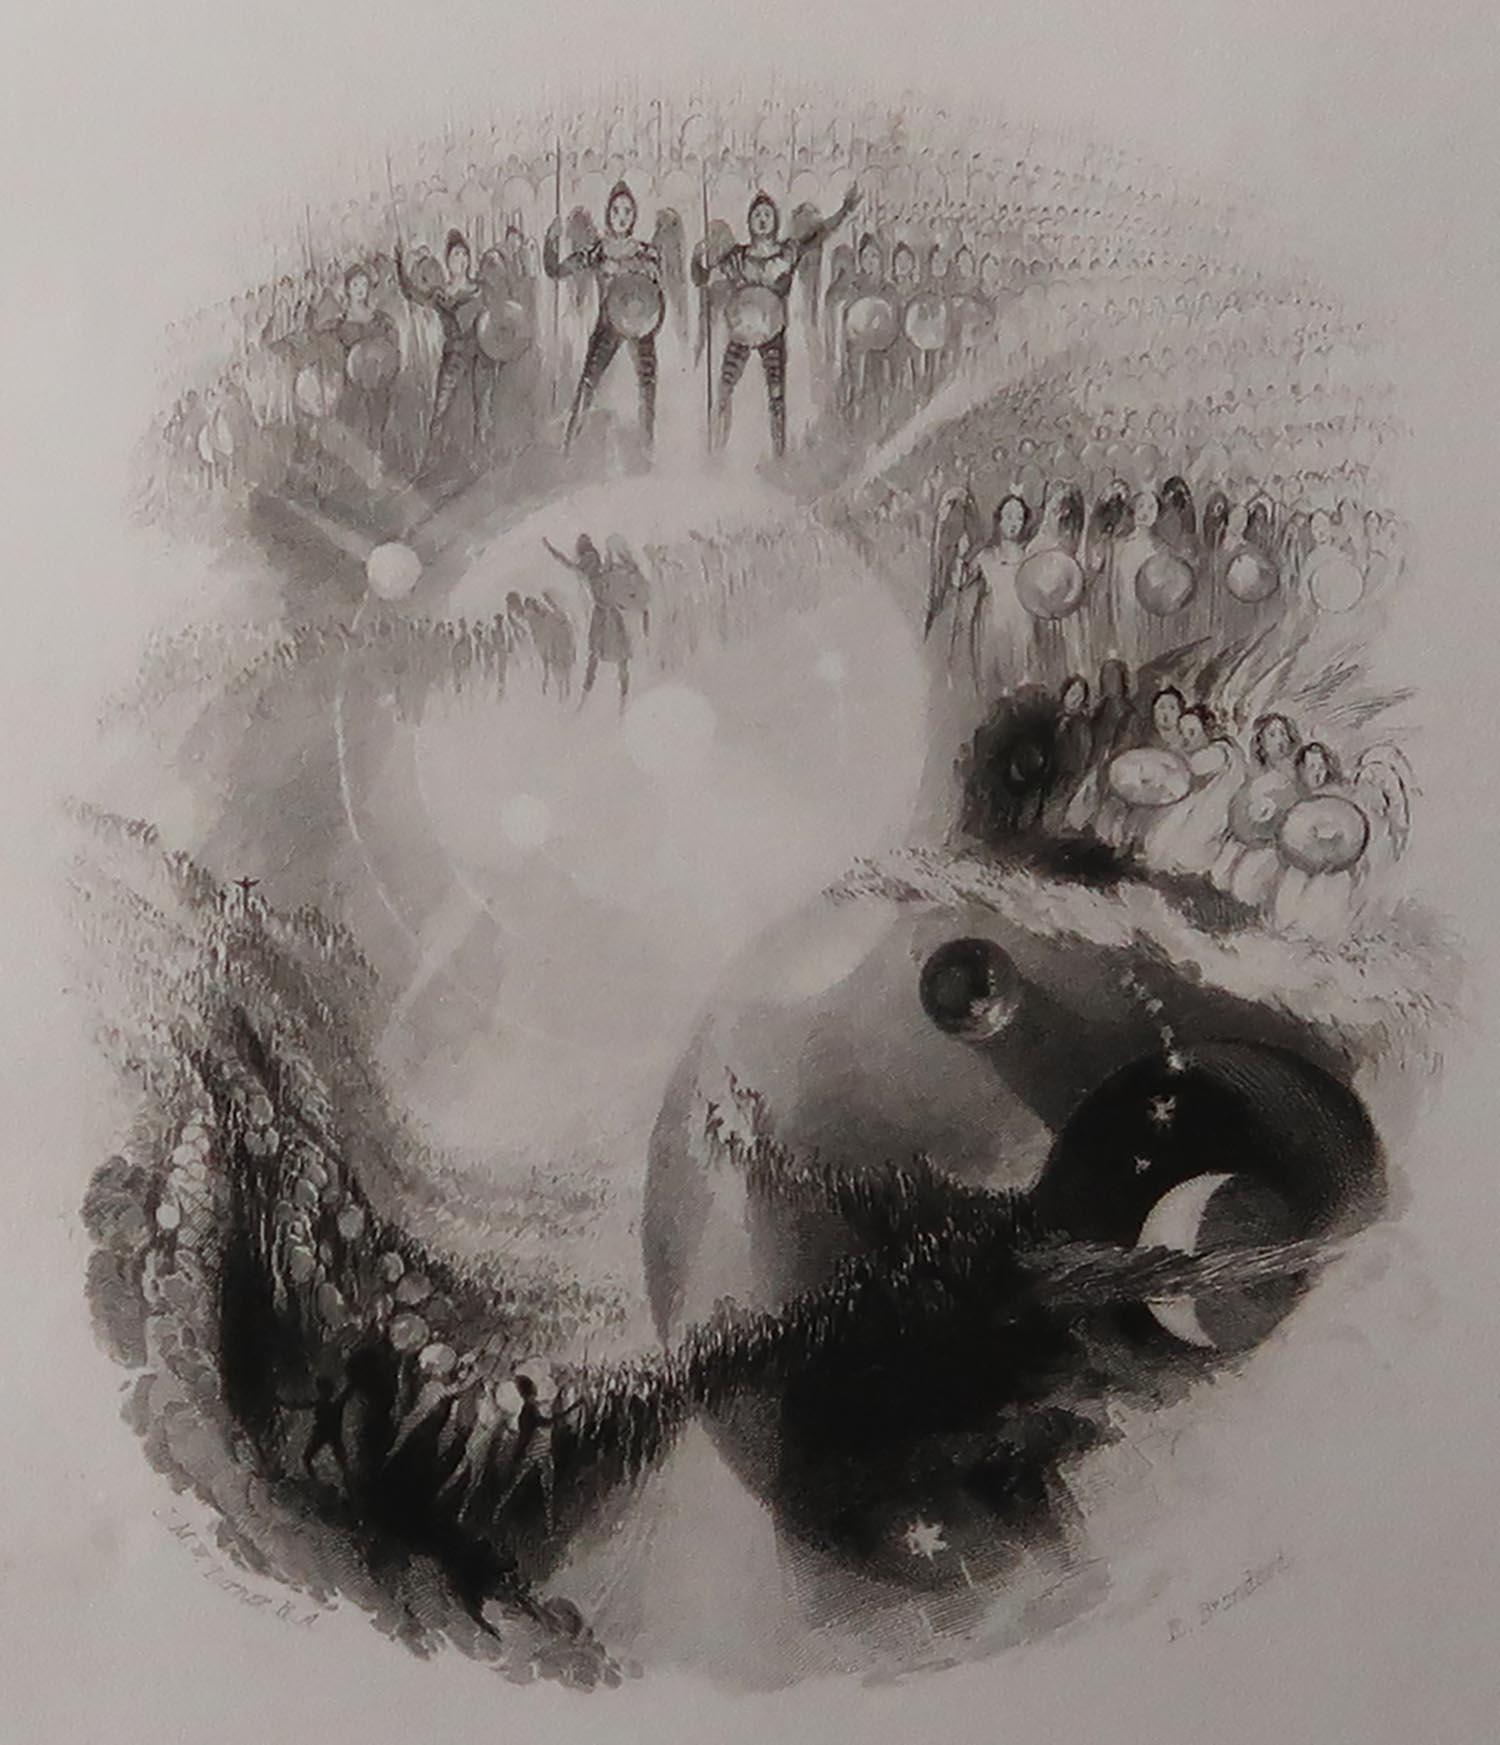 Sensational image from a drawing by J.M.W Turner

Steel engraving by Goodall

From Milton's 